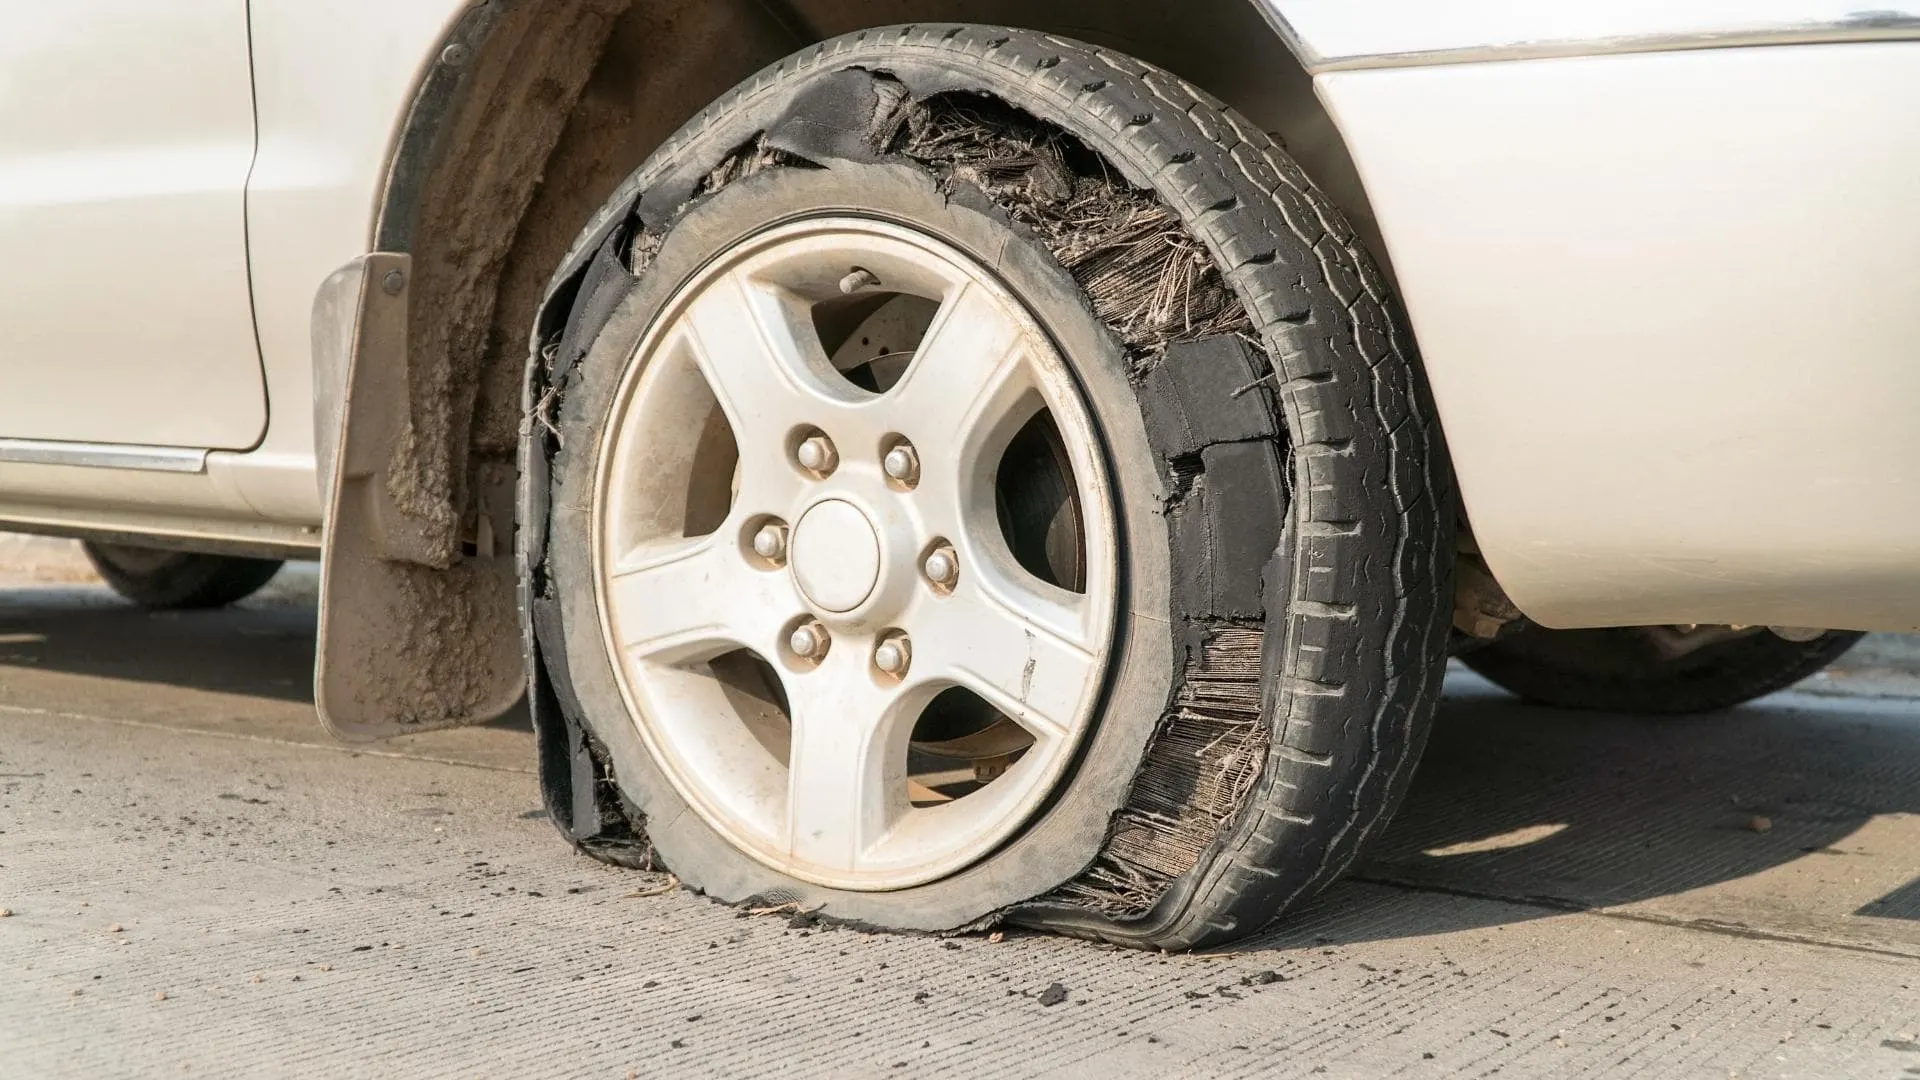 A tire blowout can be serious on any vehicle